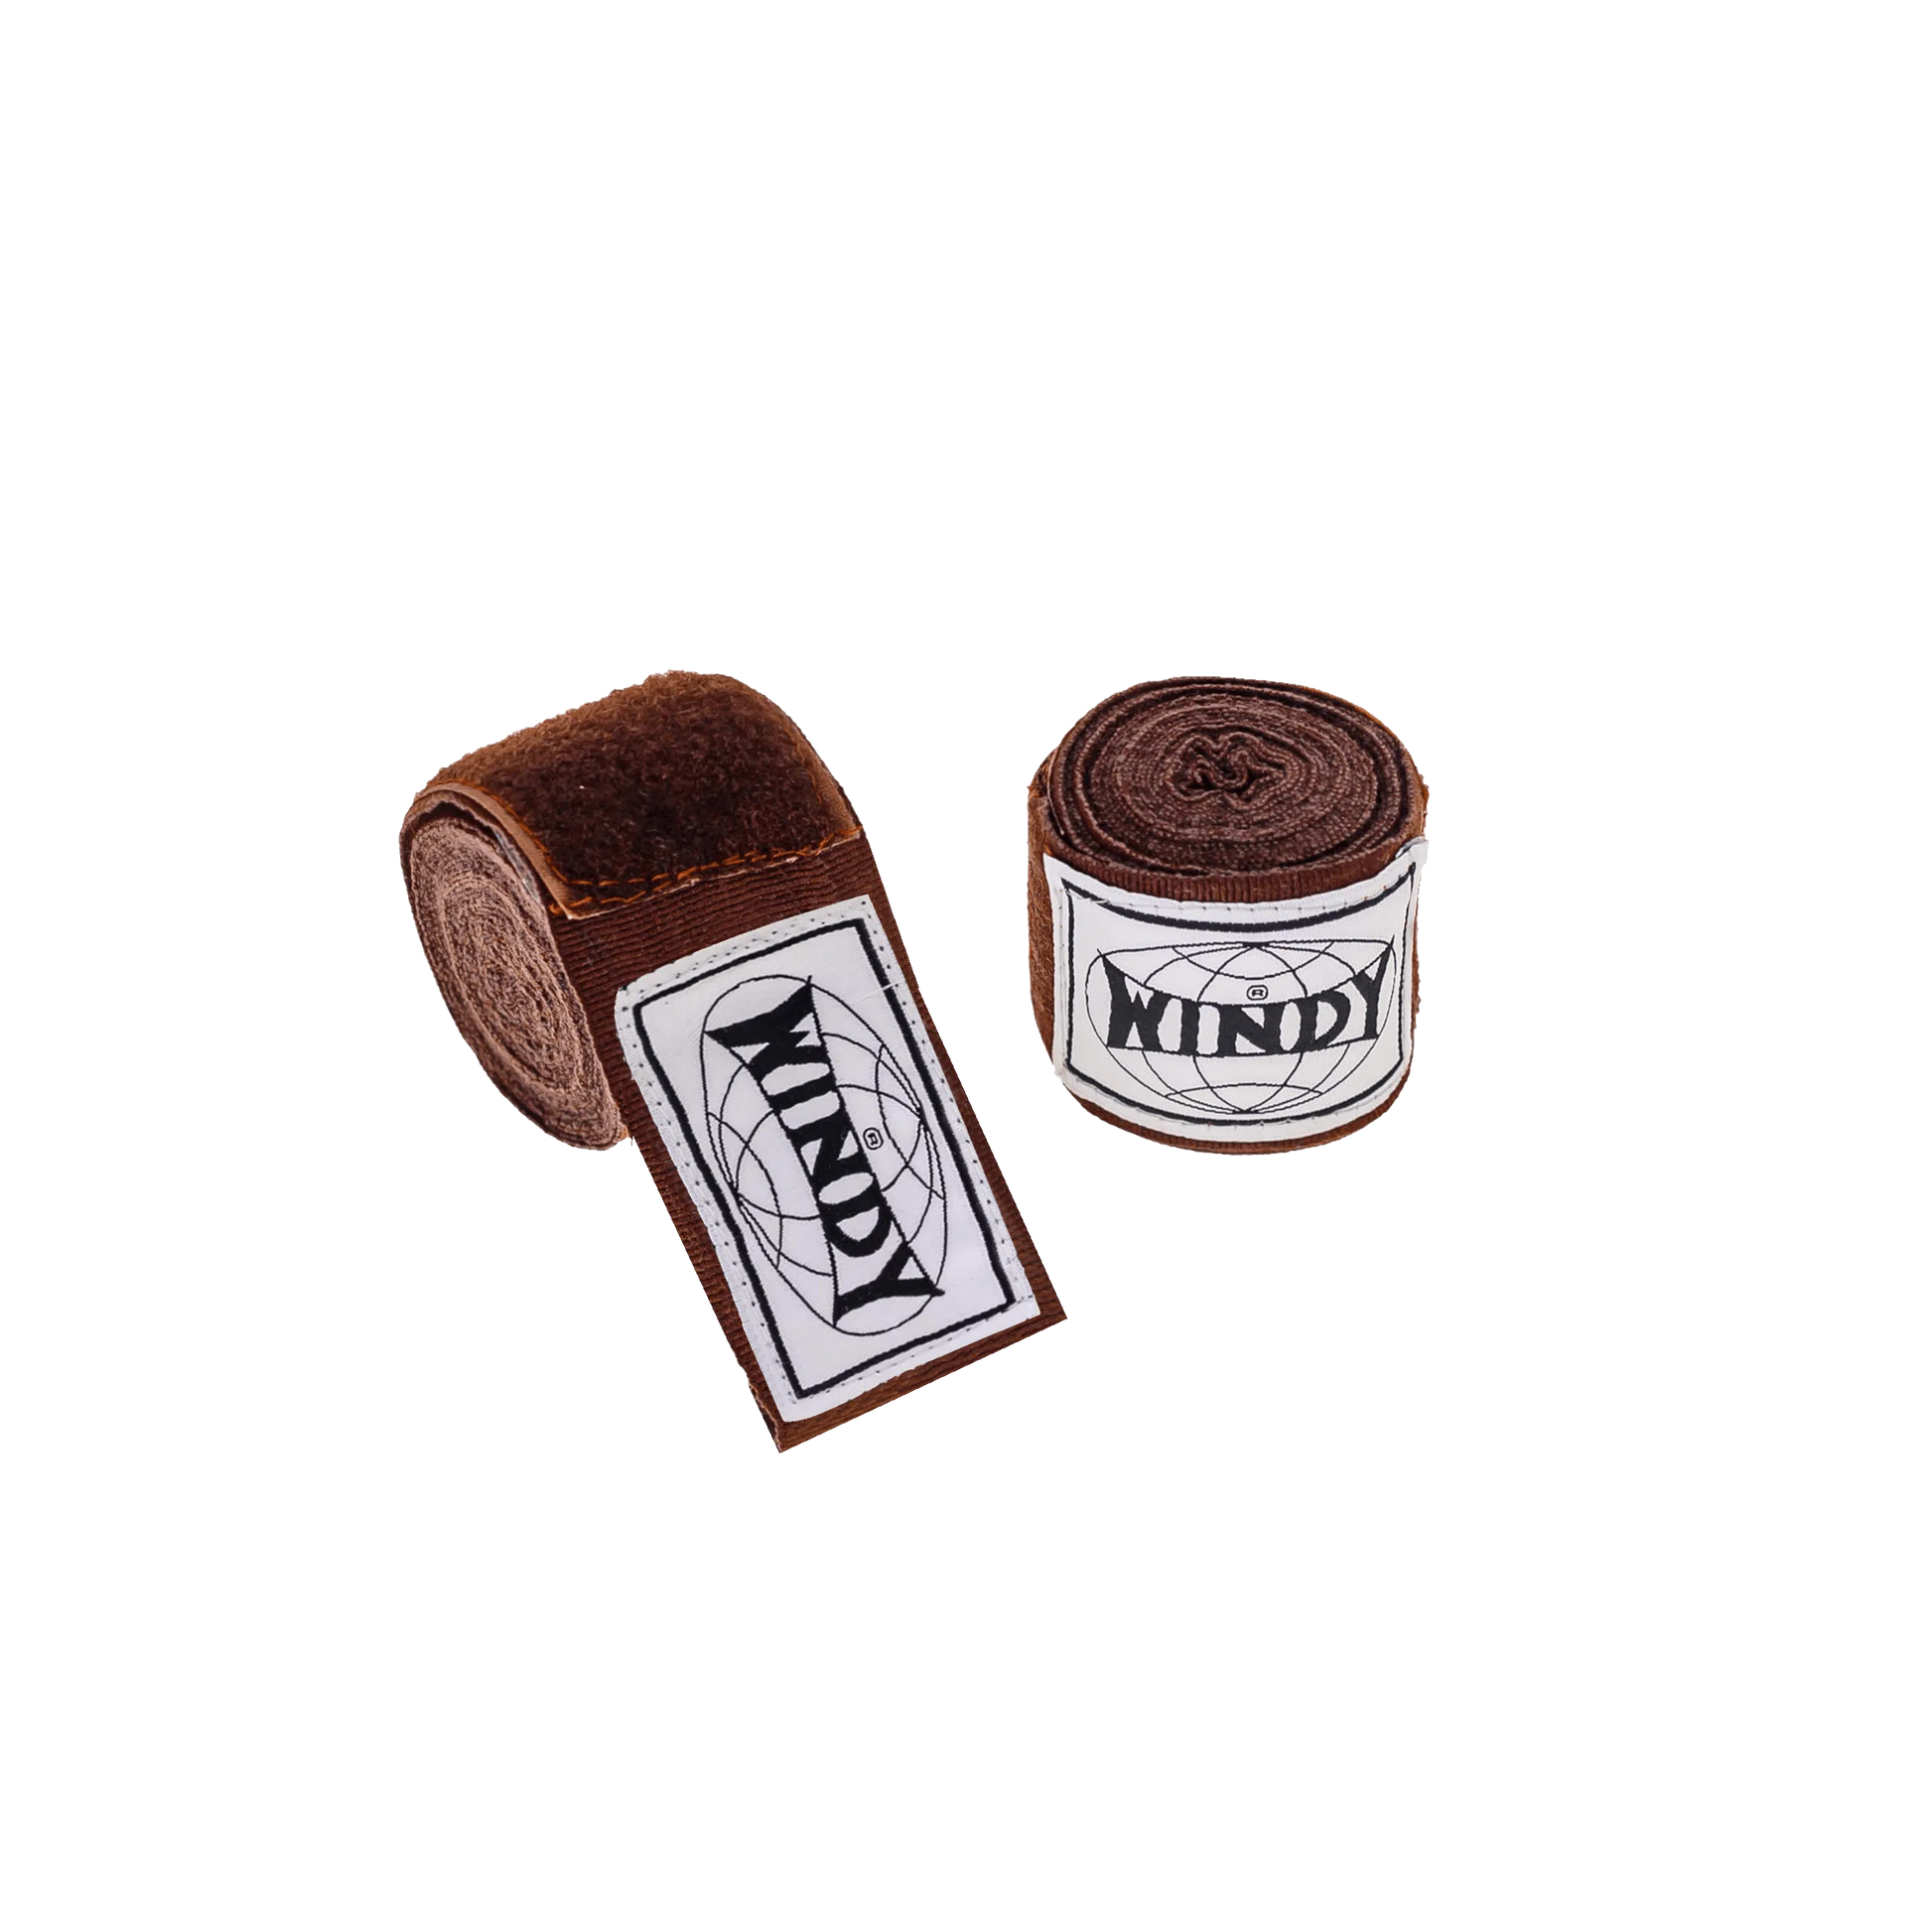 Windy Hand Wraps - Brown